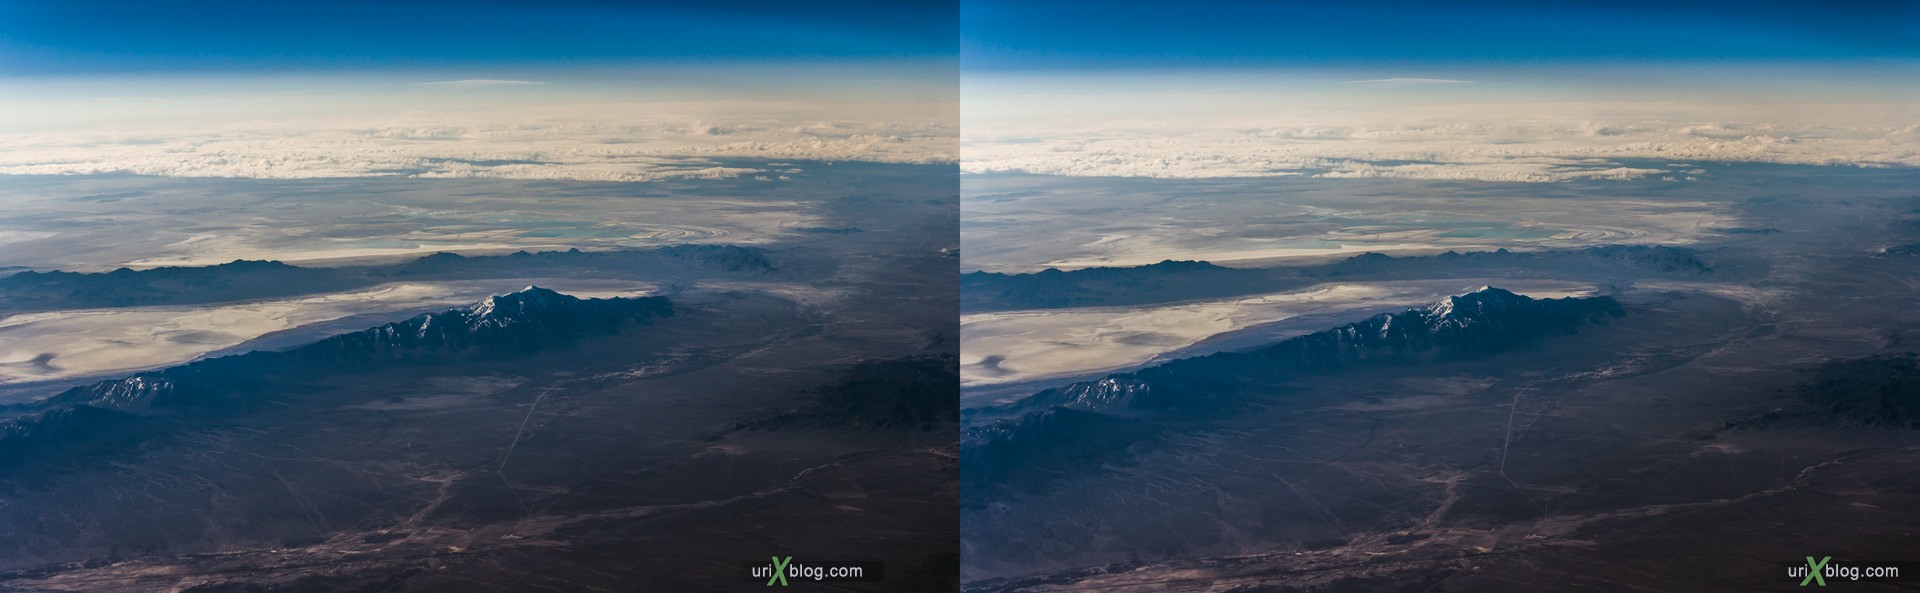 2013, Great Salt Lake, Utah, Rocky mountains, USA, panorama, airplane, black and white, bw, snow, ice, clouds, horizon, 3D, stereo pair, cross-eyed, crossview, cross view stereo pair, stereoscopic